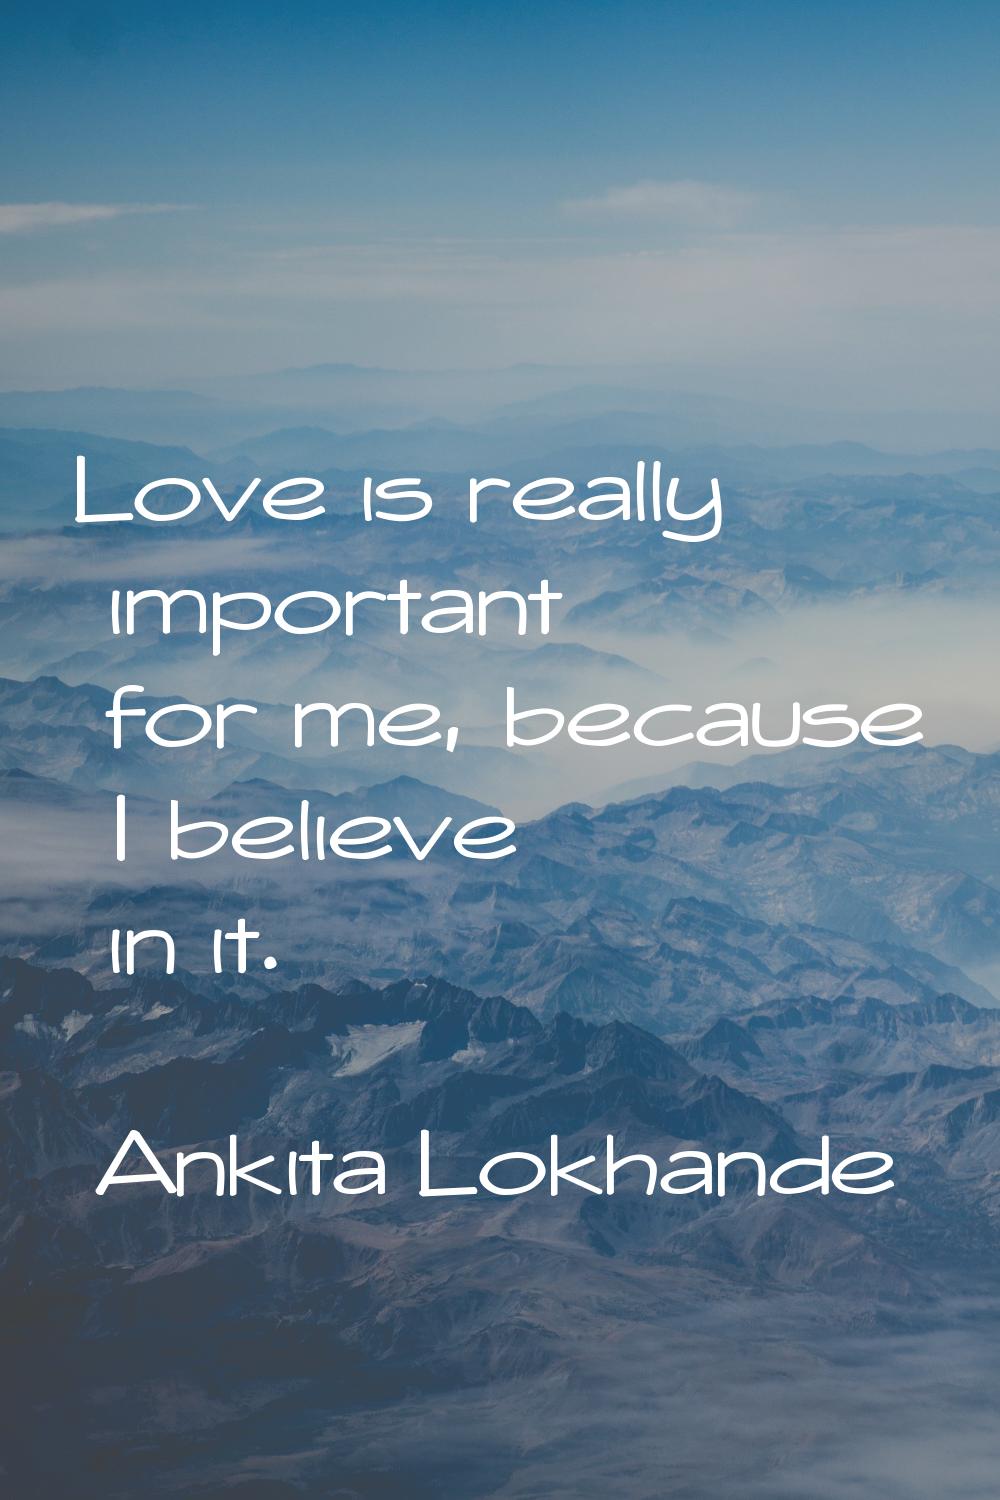 Love is really important for me, because I believe in it.